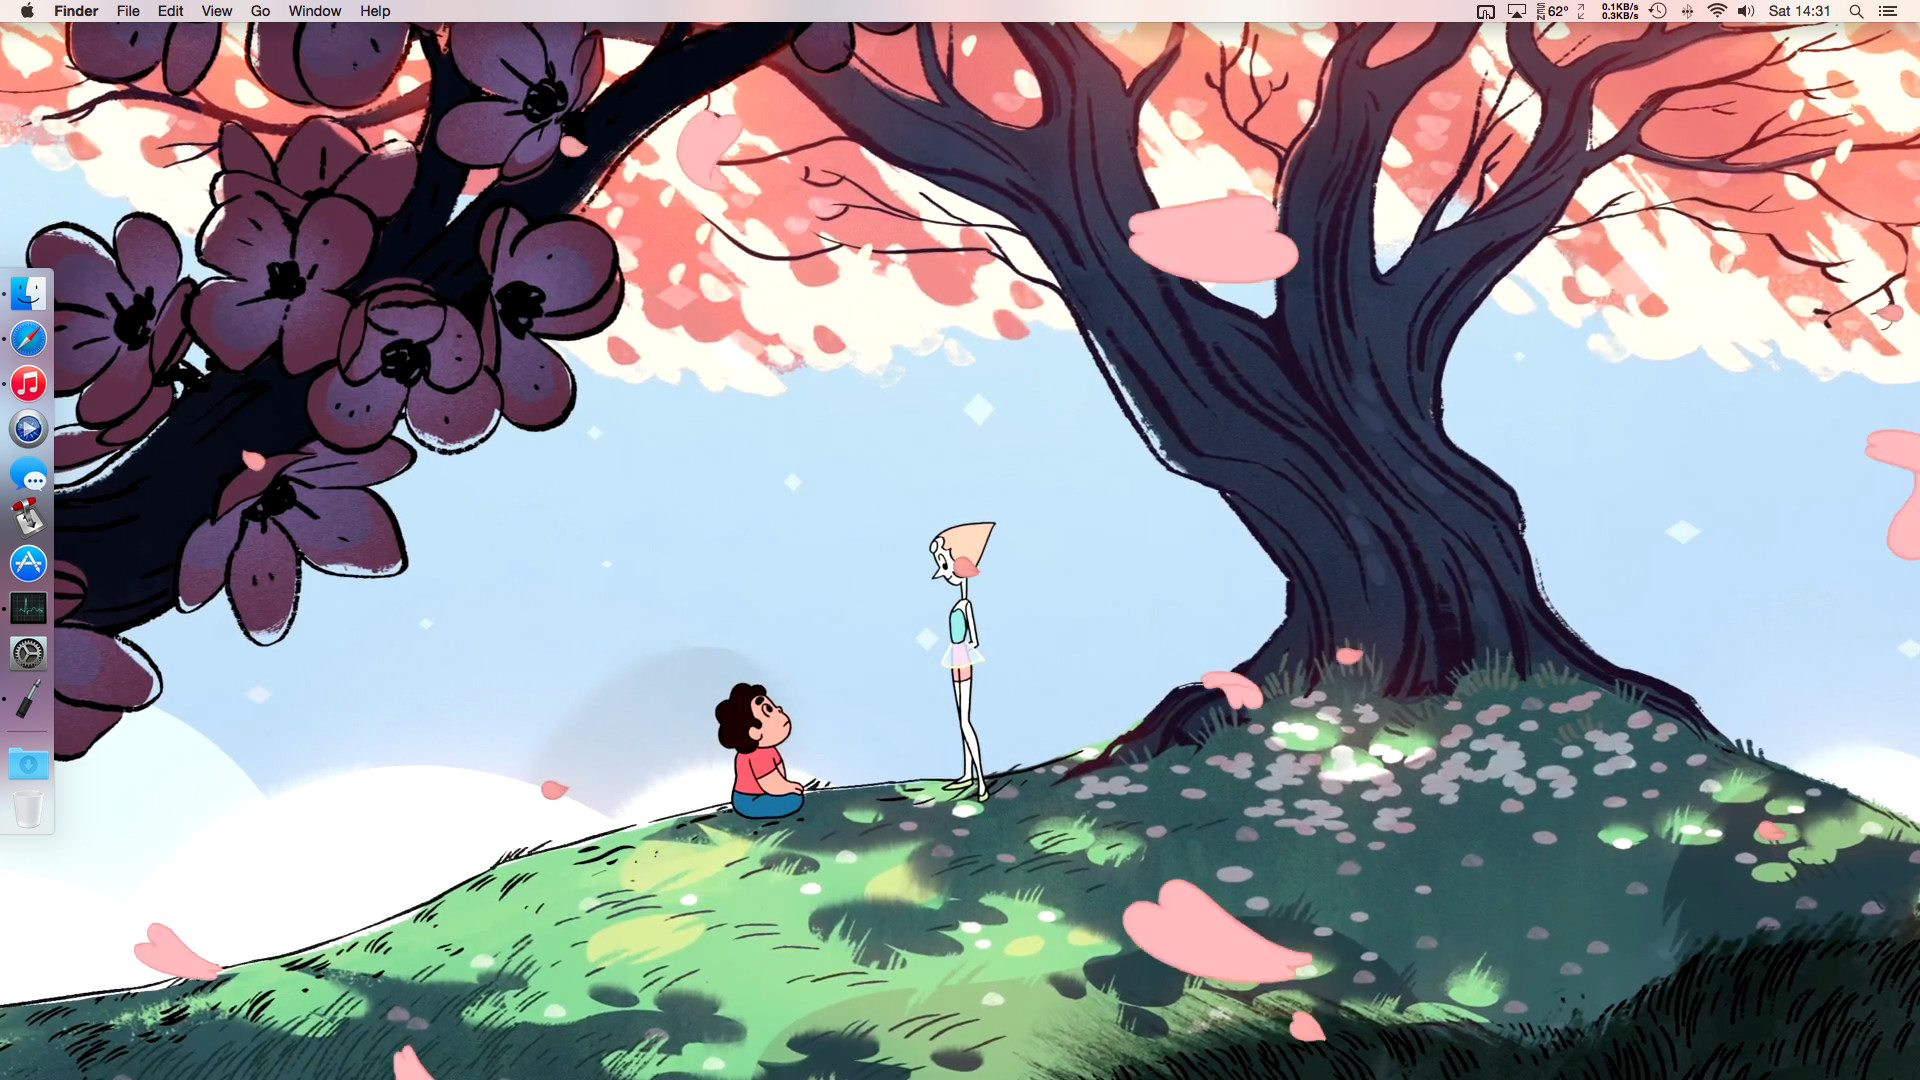 1920x1080 Nowadays I just keep saving prints from 1080p iTunes Steven Universe  episodes, and it looks amazing. I must have 40 wallpapers from it on  rotation.